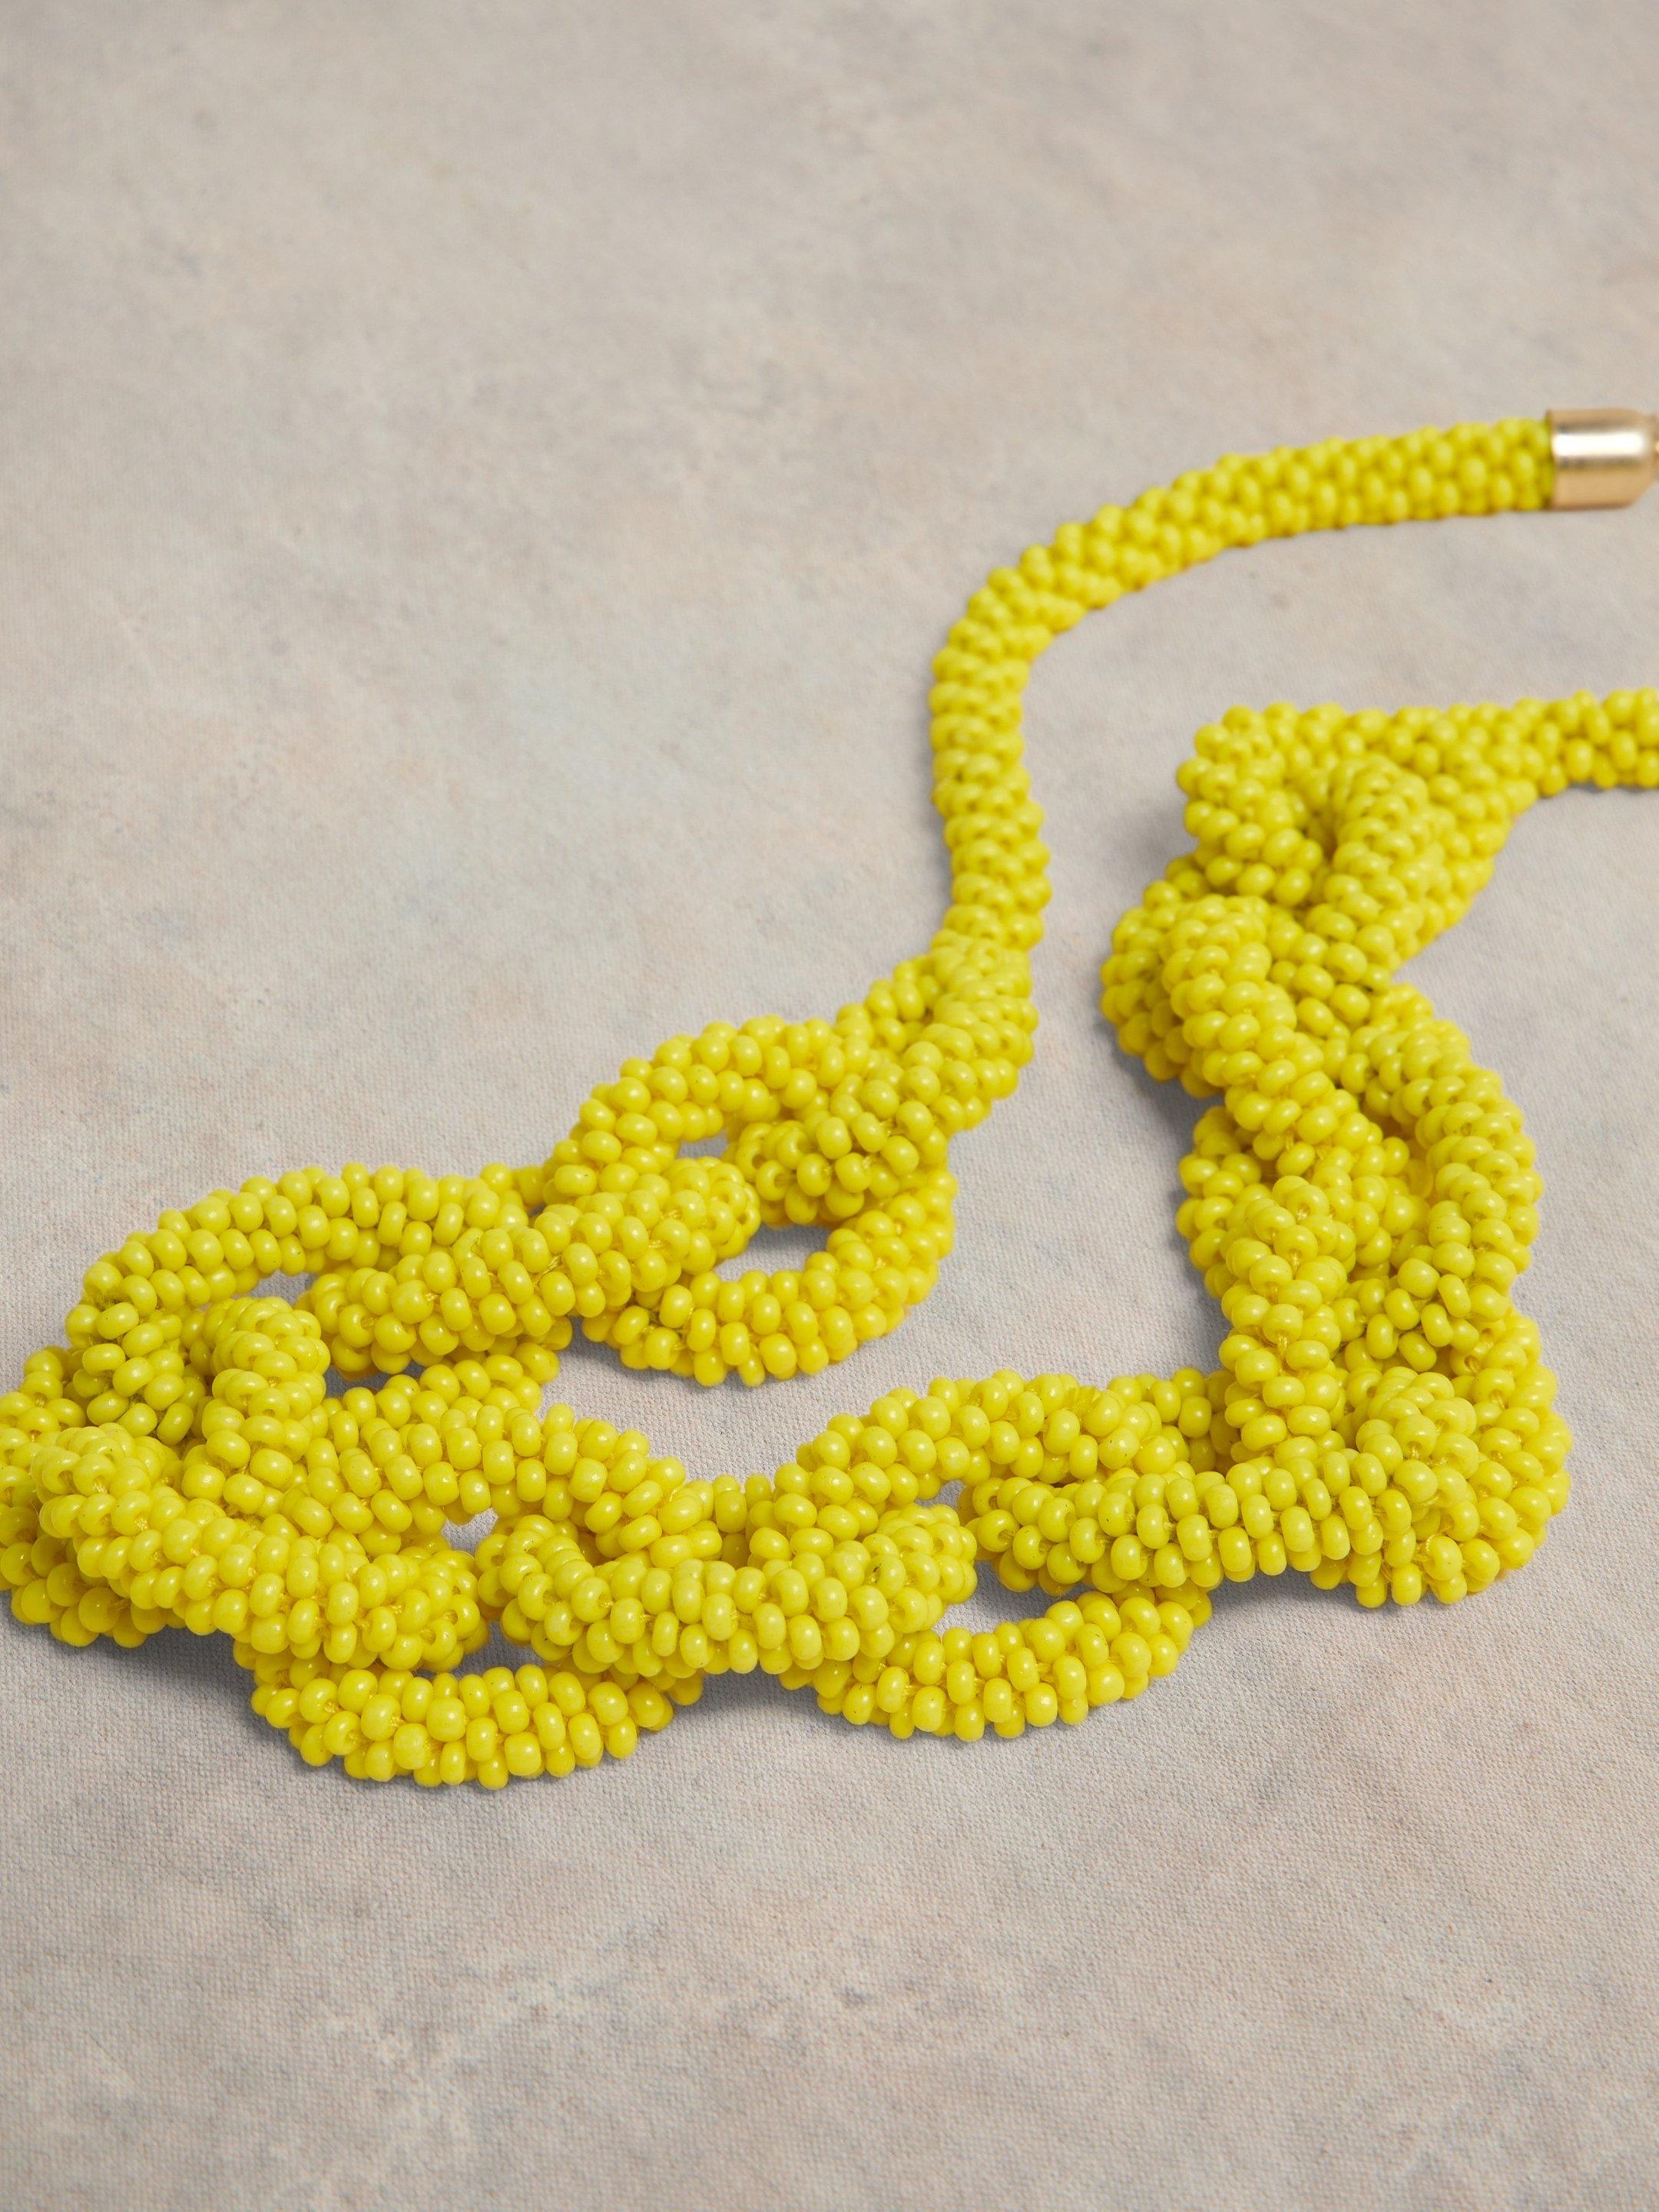 Fine Bead Link Necklace in BRT YELLOW - FLAT DETAIL